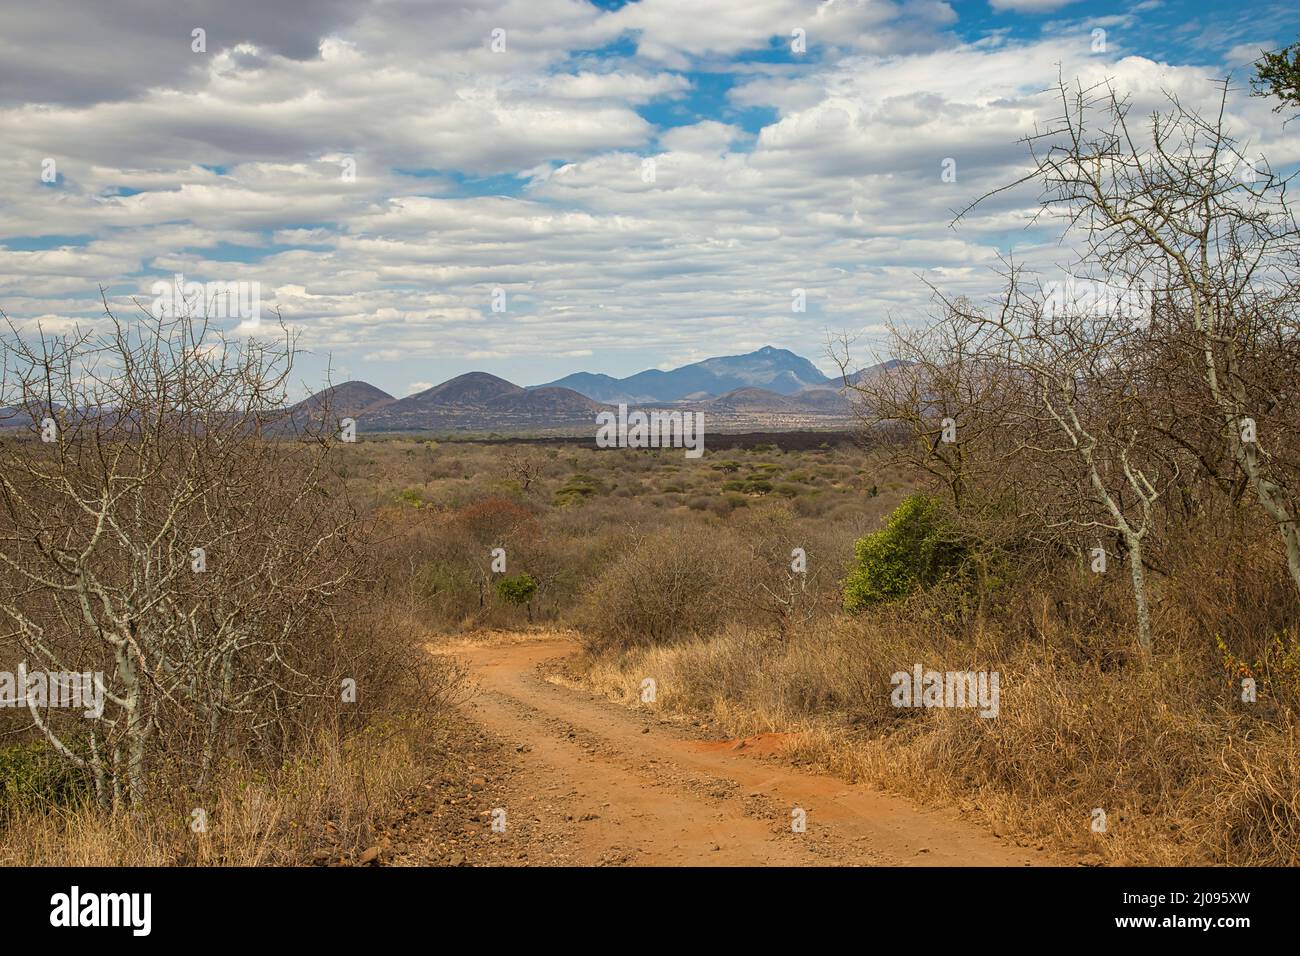 Landscape in Tsavo West National Park with a distant view of the Shetani lava flows. Stock Photo